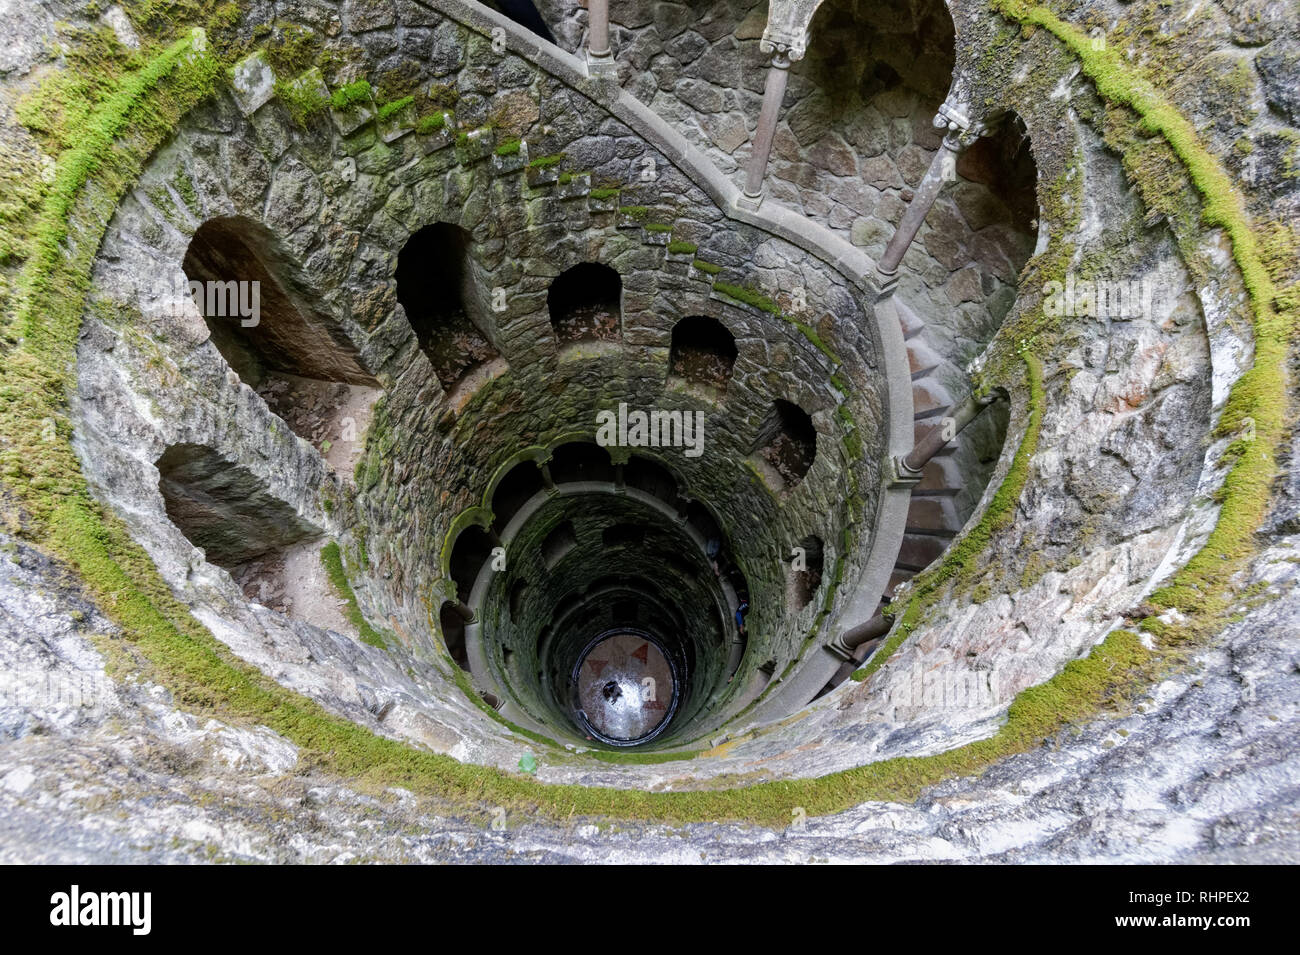 Initiation well or inverted tower in the park of the Quinta da Regaleira  palace in Sintra, Portugal Stock Photo - Alamy